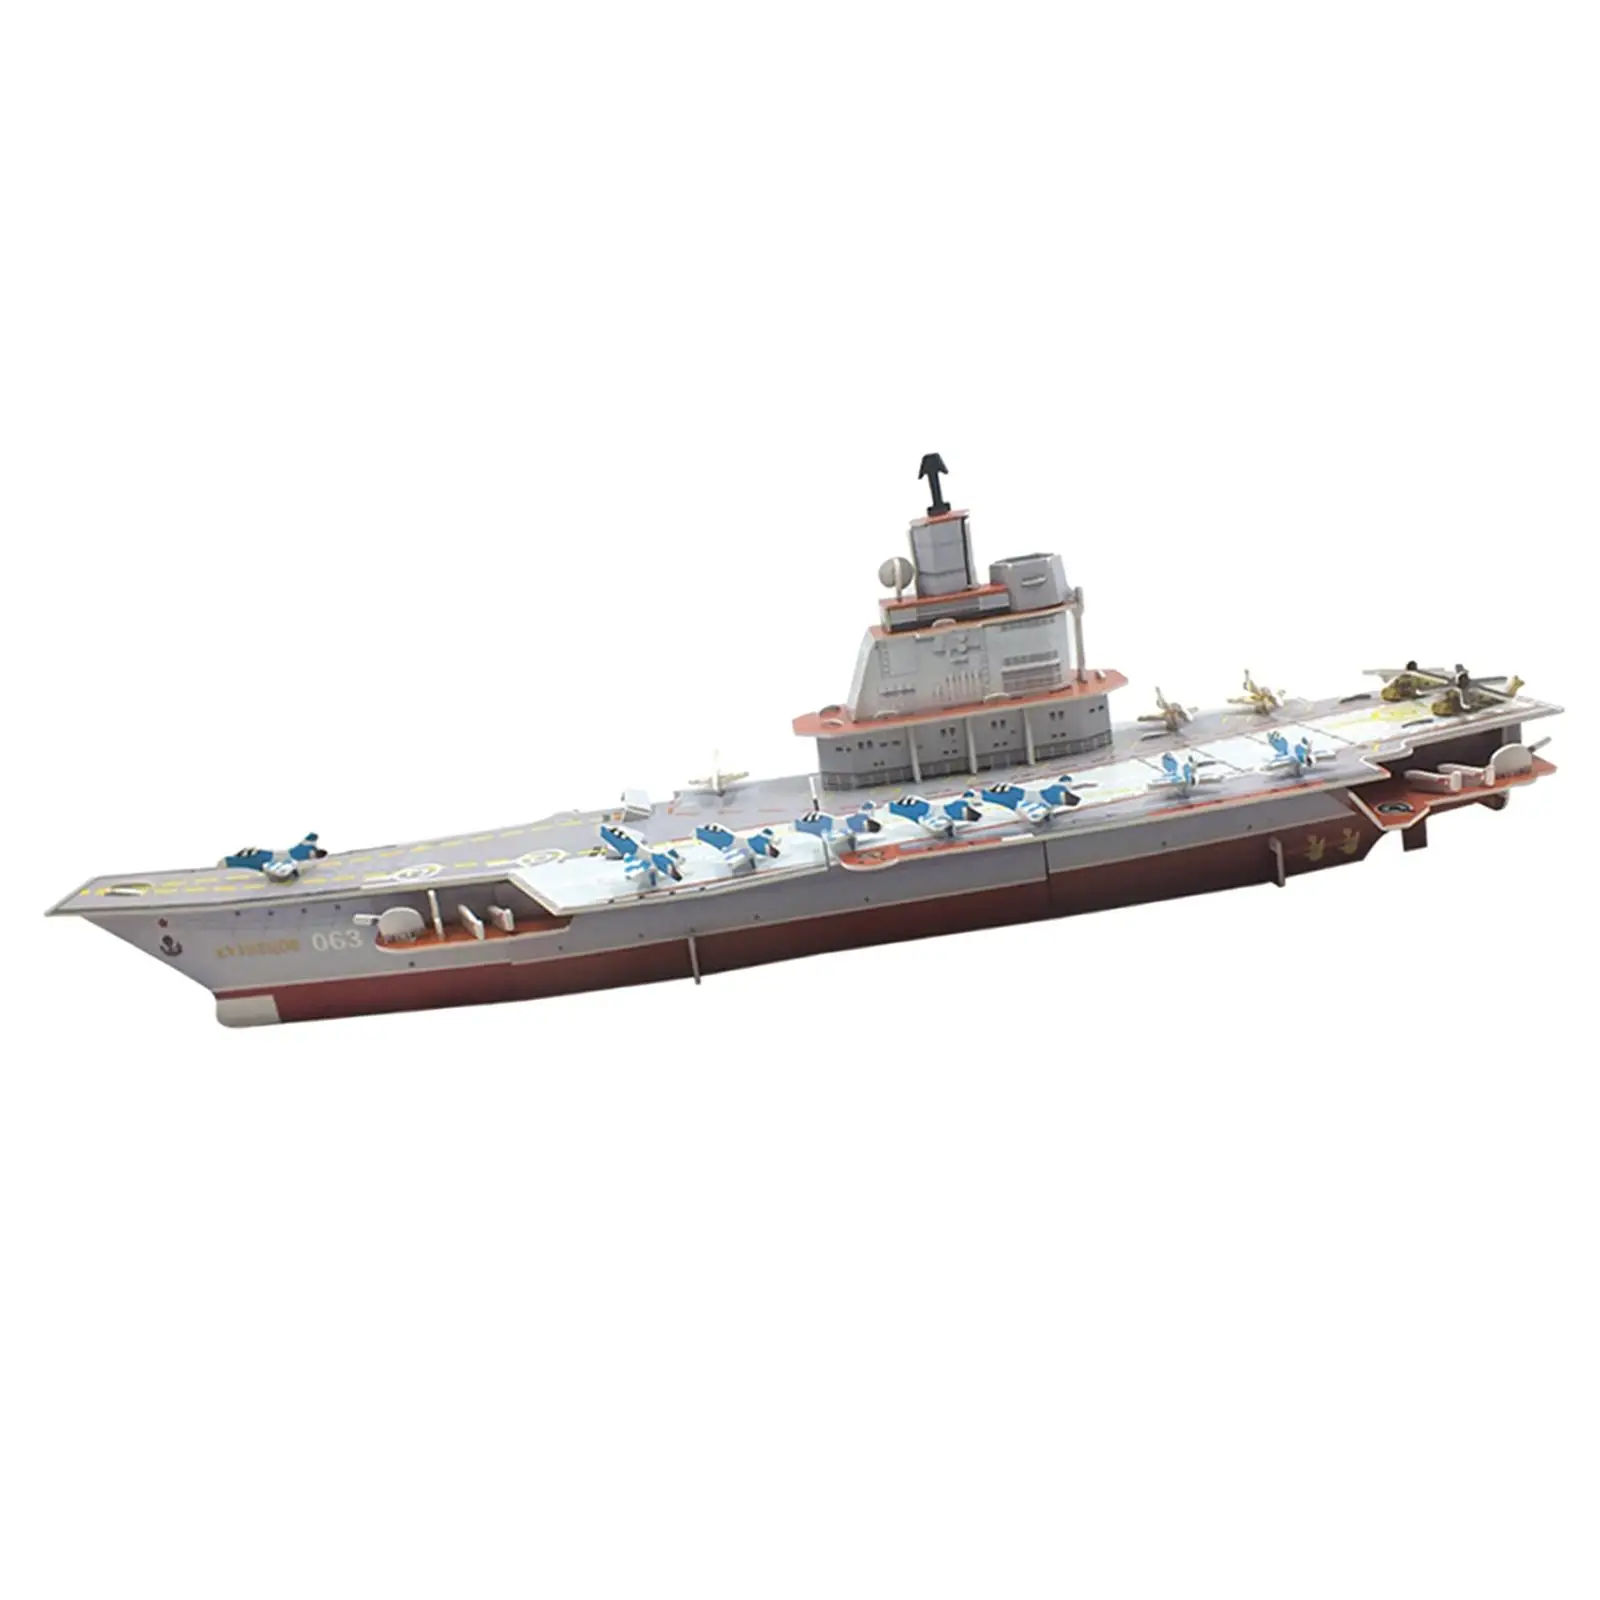 Ship Boat Model Kits 3D Model Kit Early Educational Toy Ship Model Kits for Bedroom Study Collections Decoration